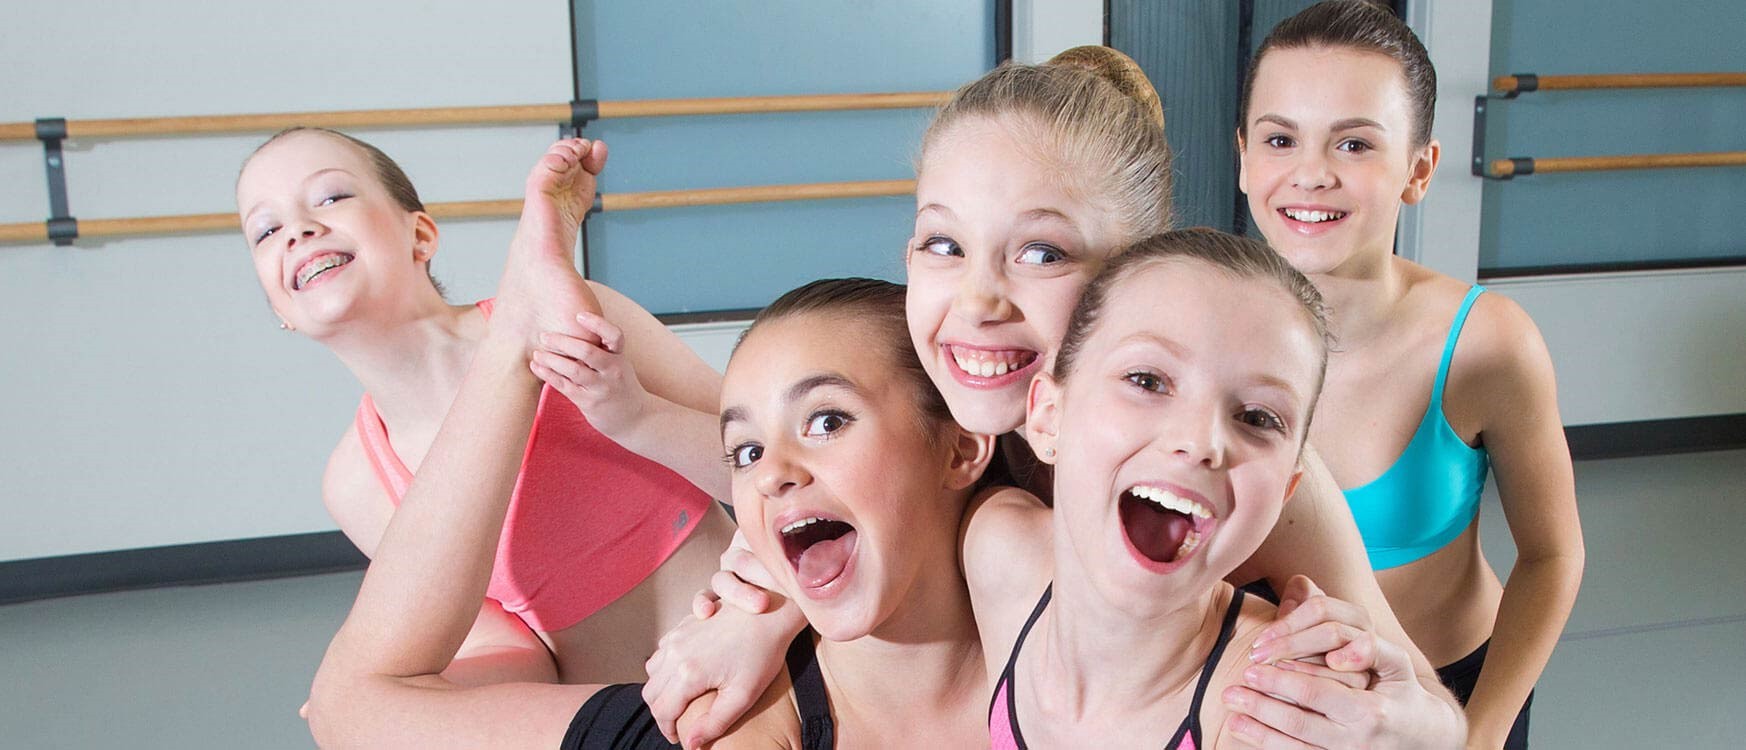 Recreational classes for students seeking fun & exercise